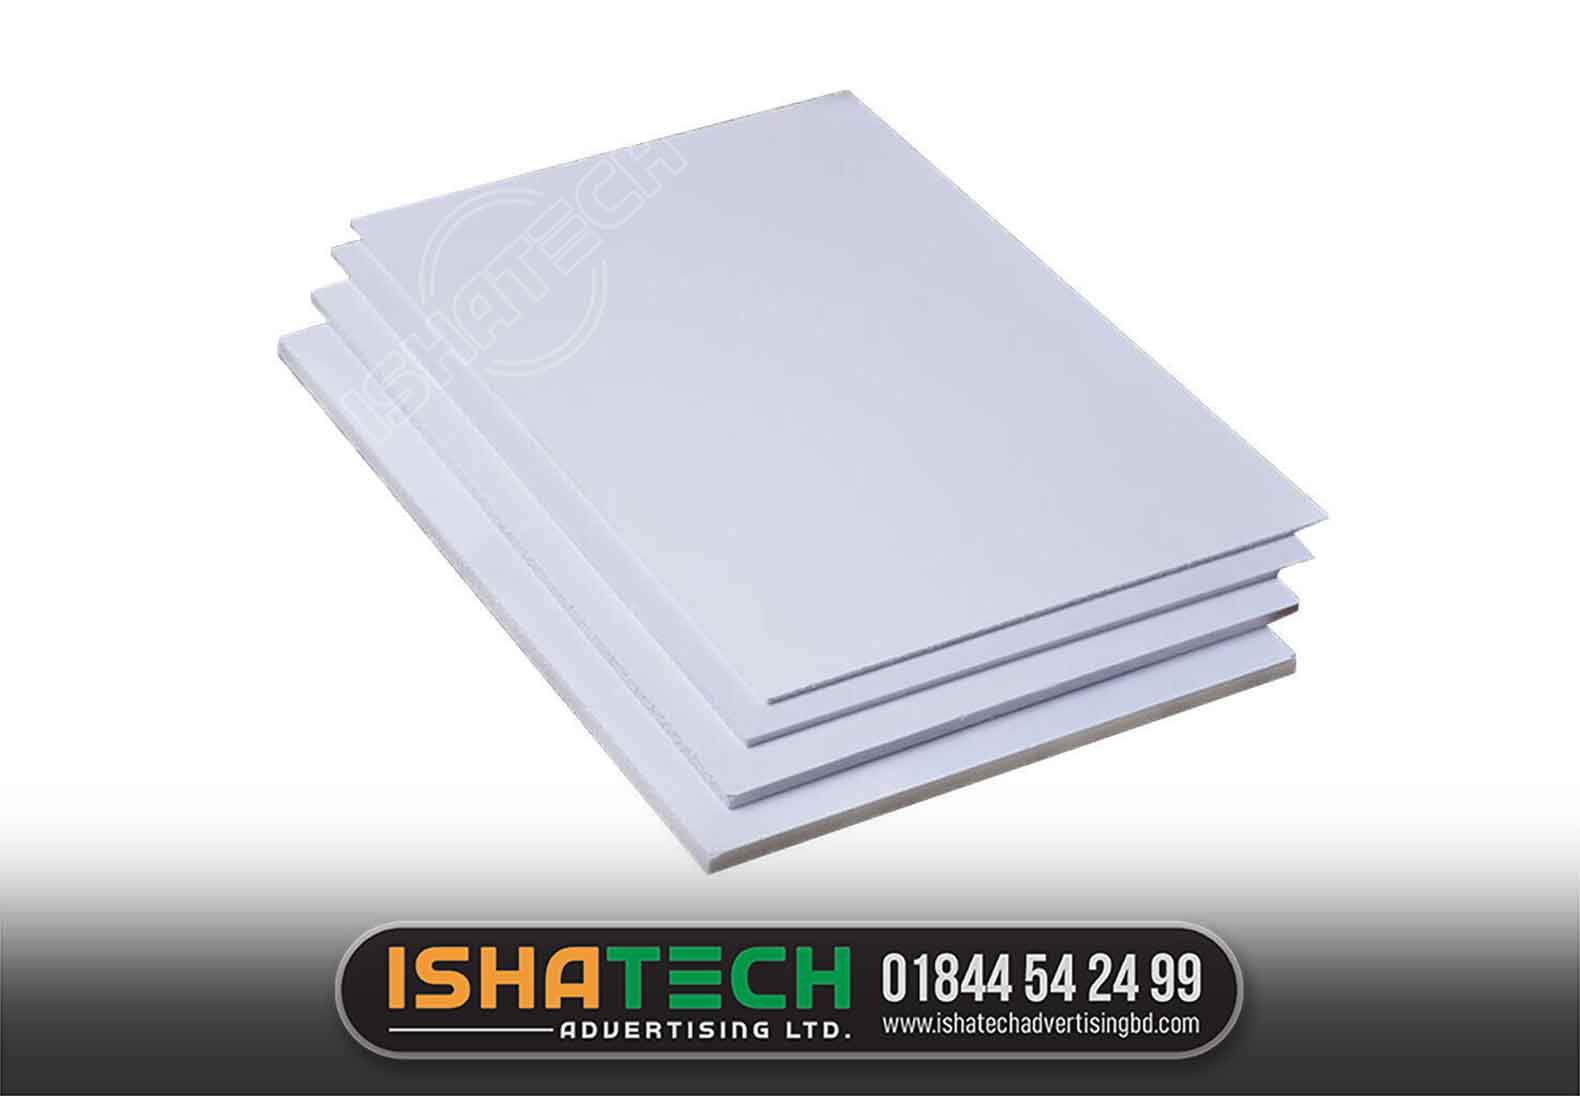 PVC board 5mm for Handmade Model or chasis making material DIY 12 Inch X 10 Inch - 1 pcs | Orison PVC sheet, Thickness: 4mm